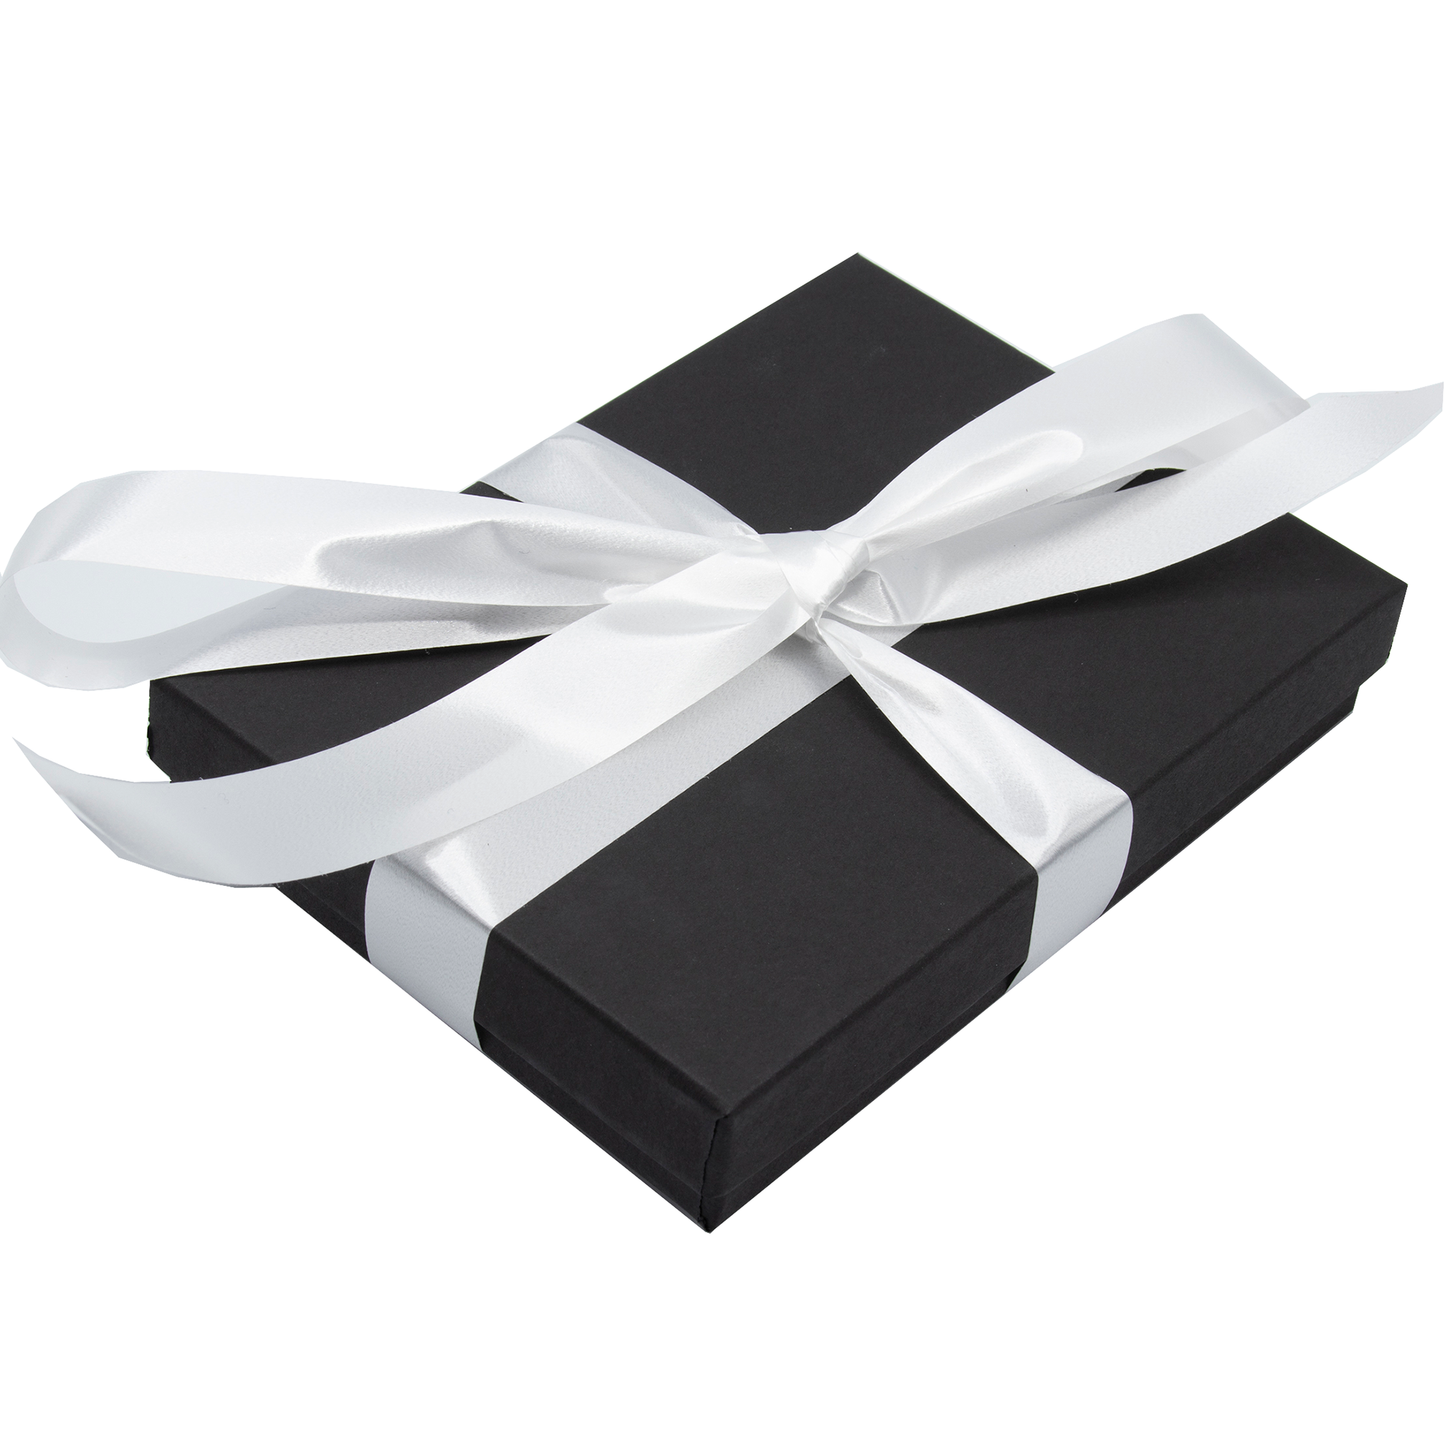 Black gift box with white ribbon included with every Atomic Earrings purchase - by AtomicMobiles.com